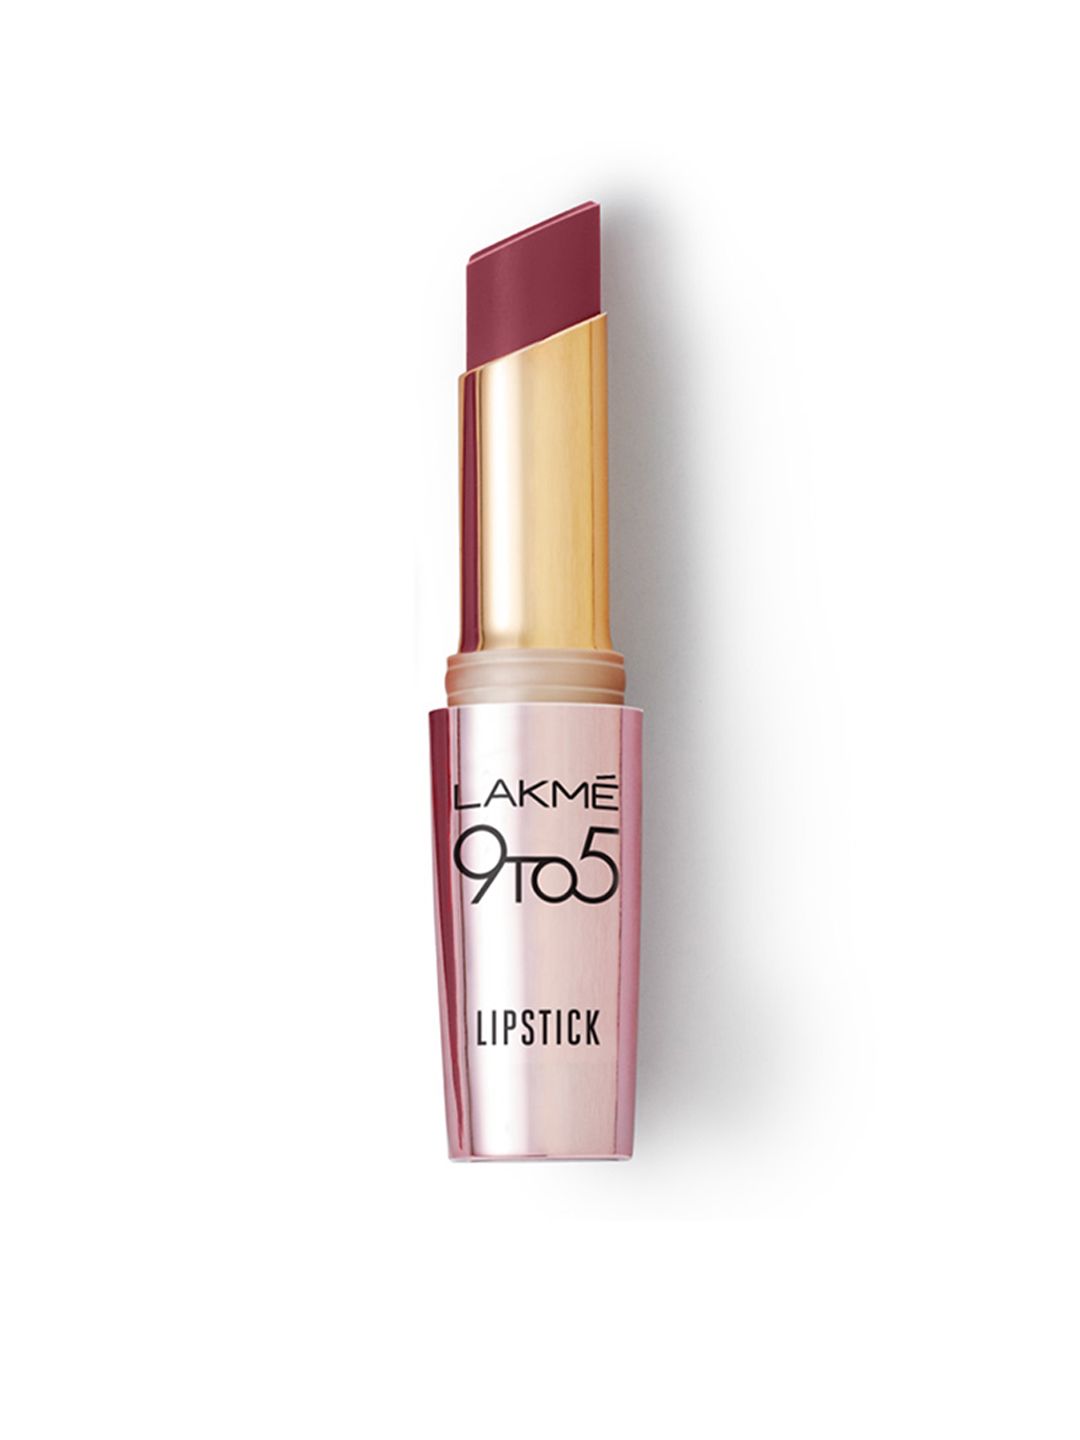 Lakme 9TO5 Primer + Matte Lipstick- MP3 Pink Party Price in India